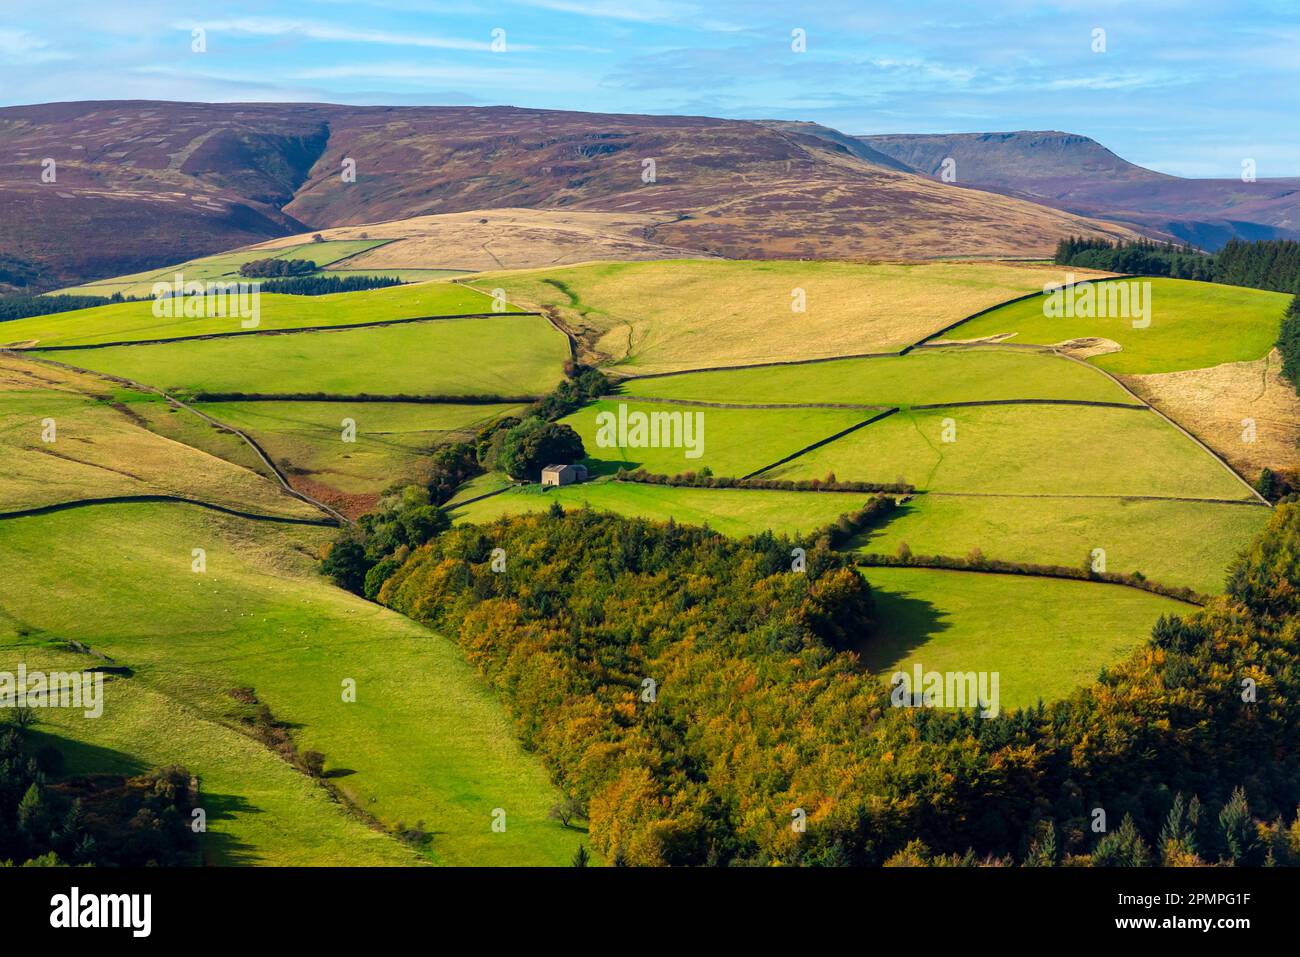 Typical Peak District National Park landscape near Ladybower Reservoir in the High Peak area of Derbyshire England UK with farmland and moors above. Stock Photo